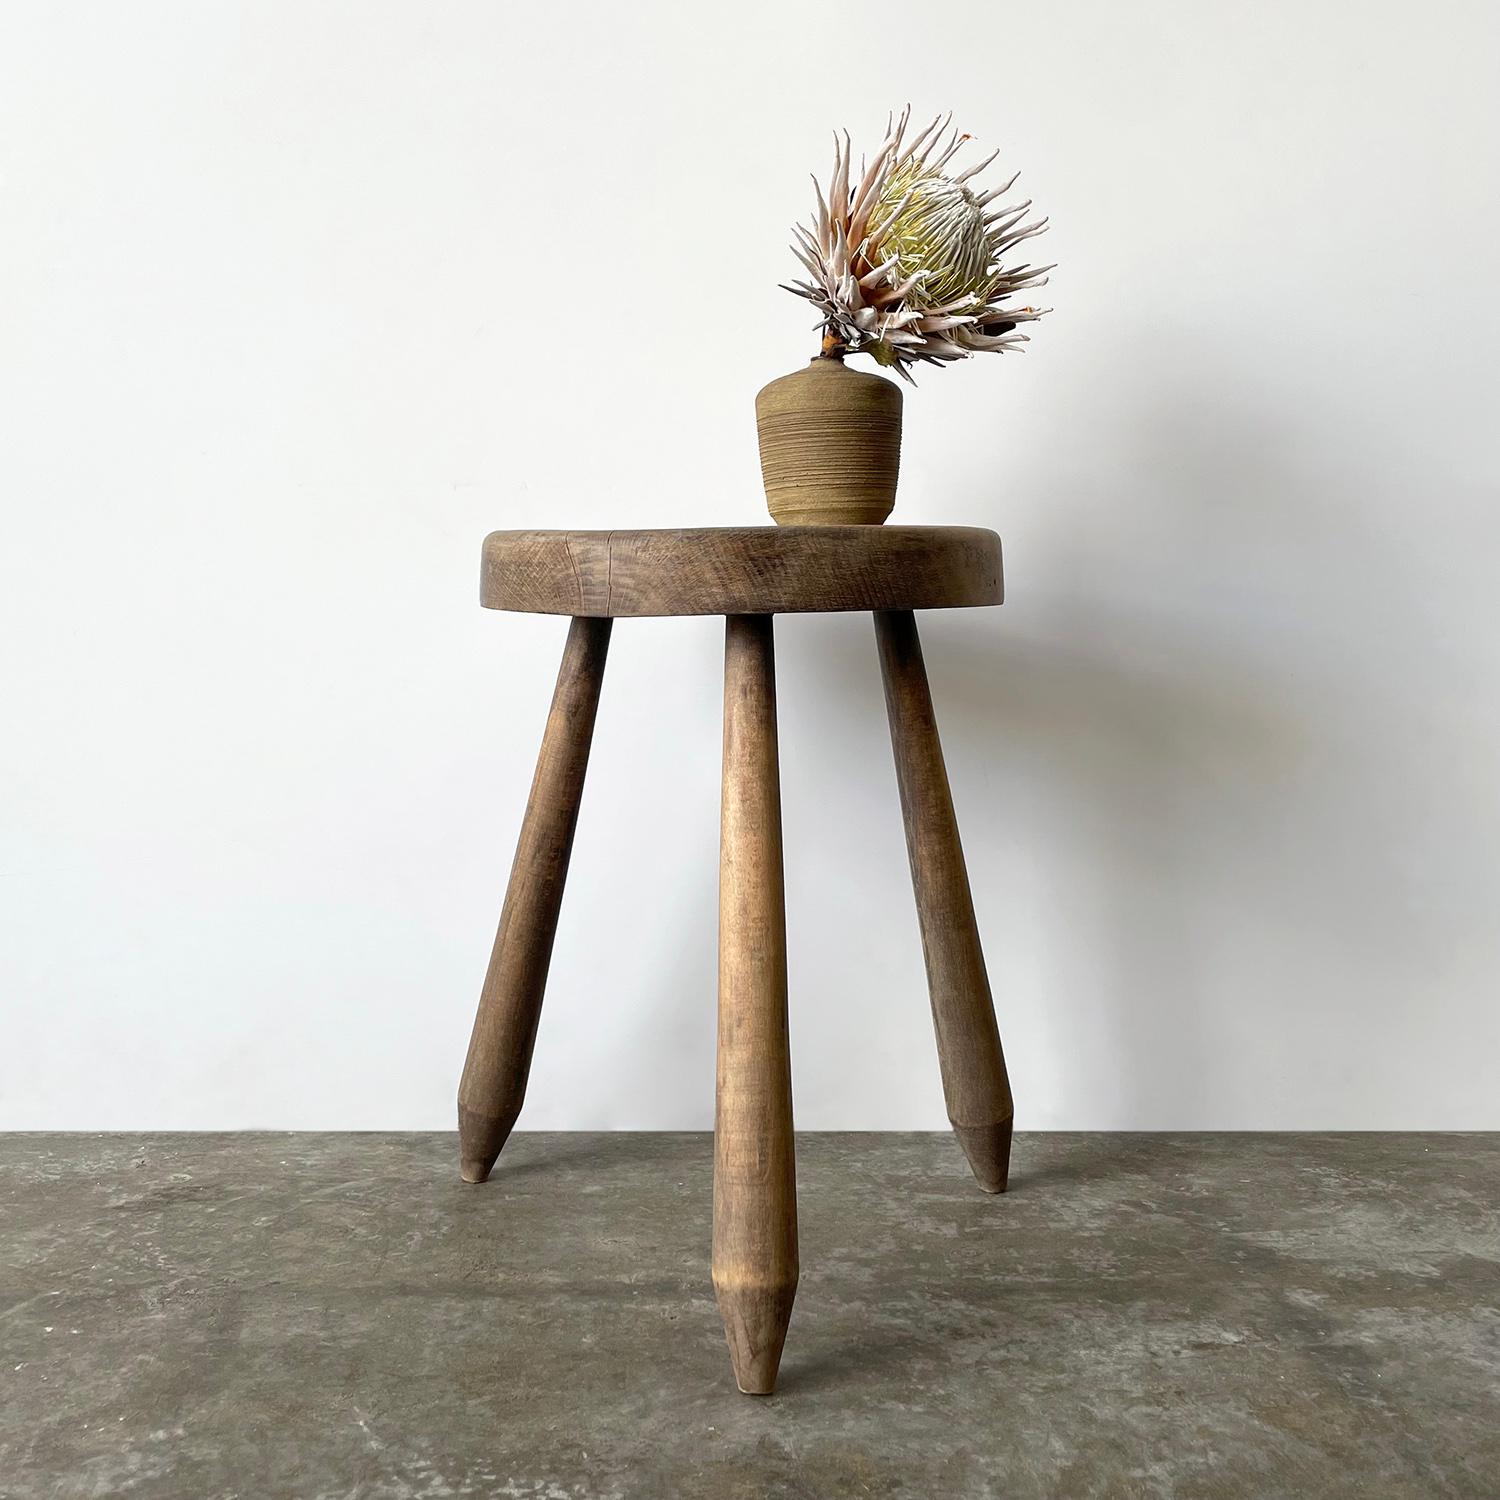 French oak tripod side table in the style of Perriand
France, early 20th century
This piece is rich with character and charm from years of life
Beautiful wood grain and original finish
Neutral toned palette with smoky brown undertones accented with